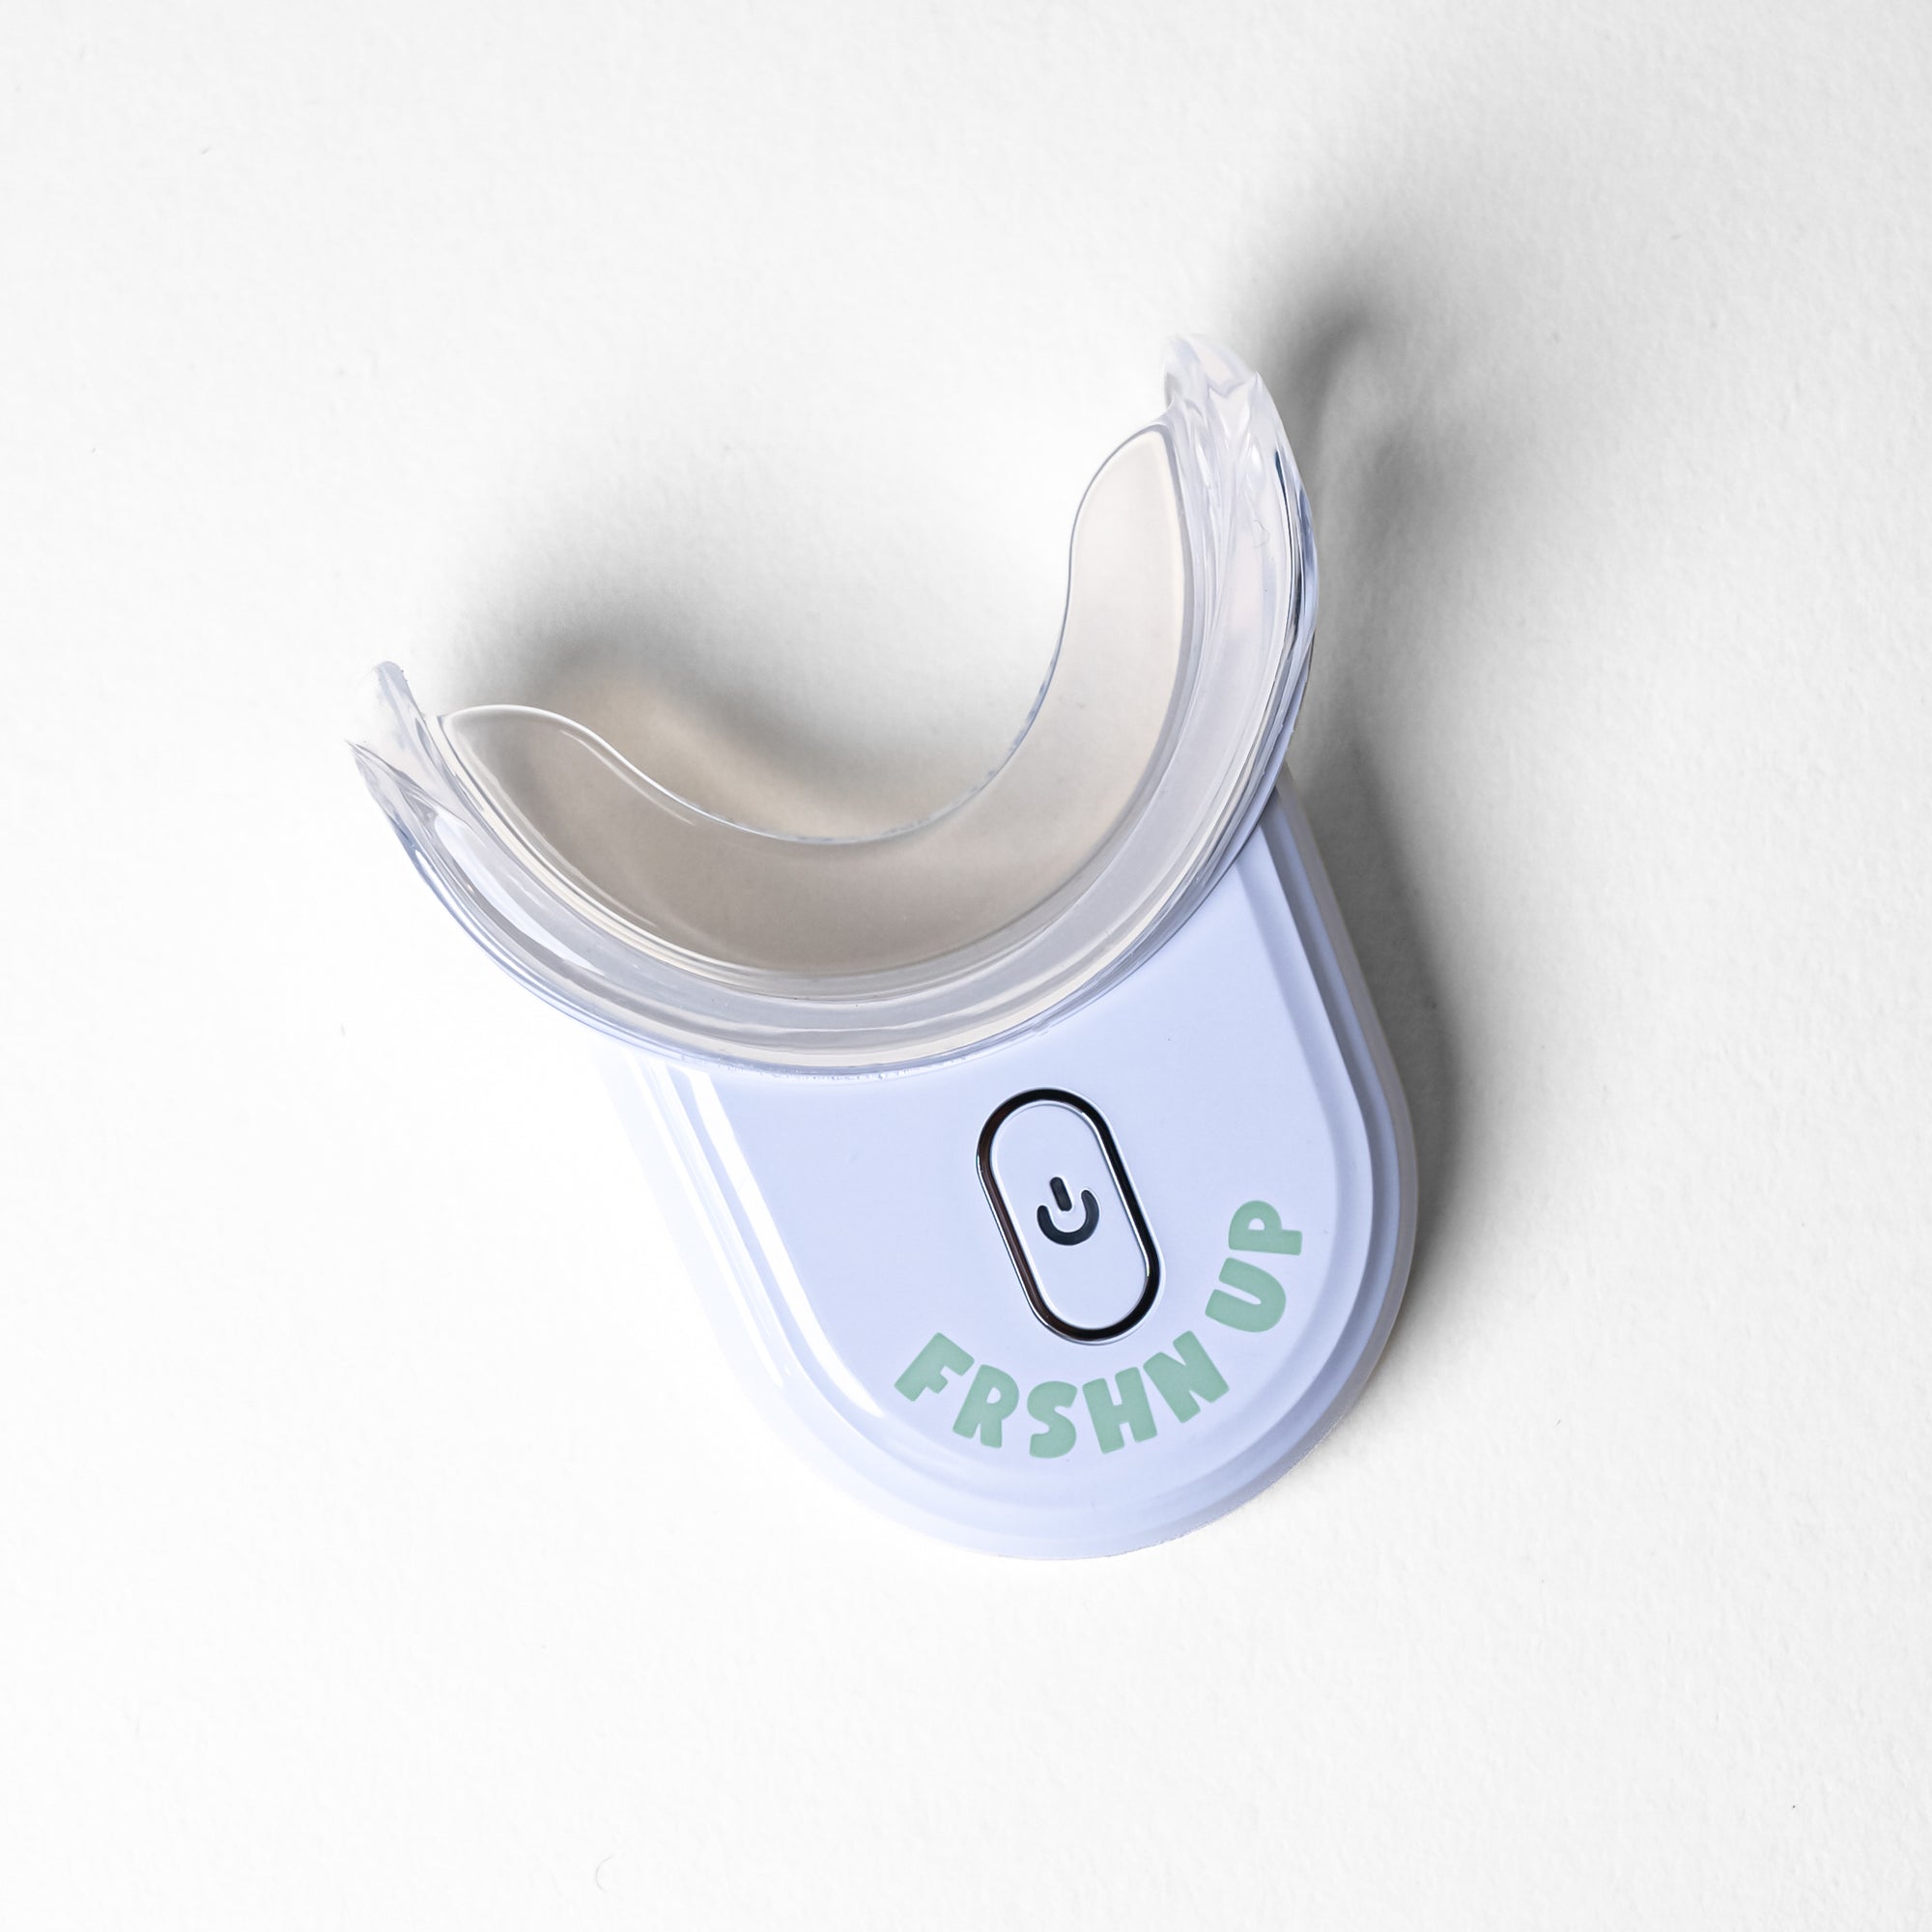 A white and clear dental mouthpiece device with a button and the words "FRSHN UP" printed on the front, designed with a teeth whitening hydrogen-peroxide formula endorsed by dental professionals, the Deluxe Lightening Whitening Kit by FRSHN UP.